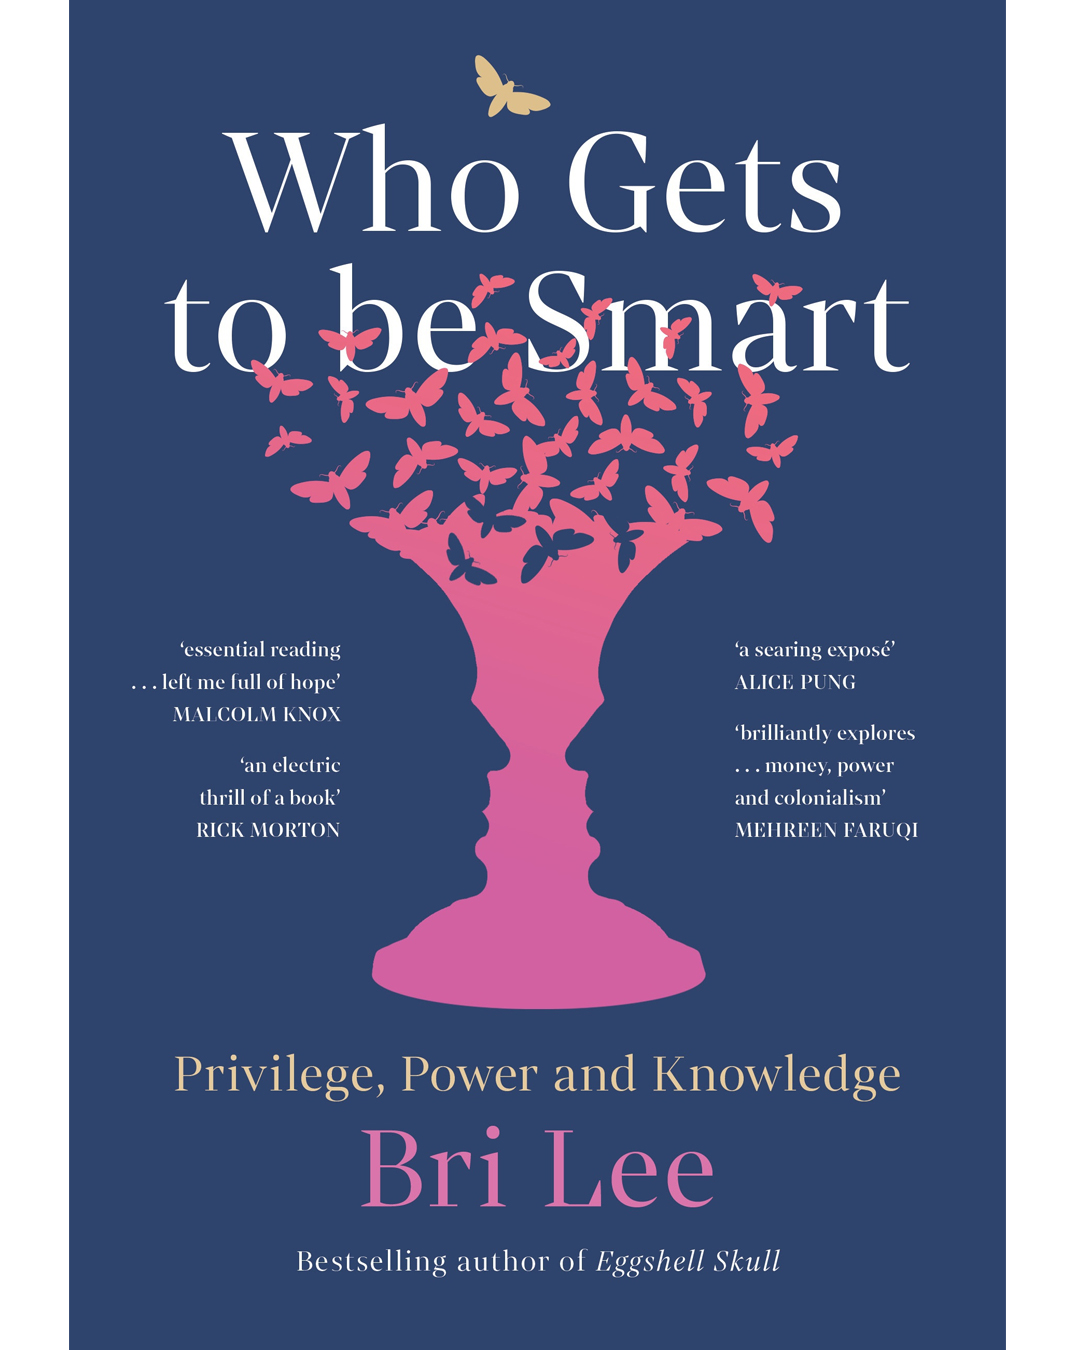 front cover of 'who gets to be smart'